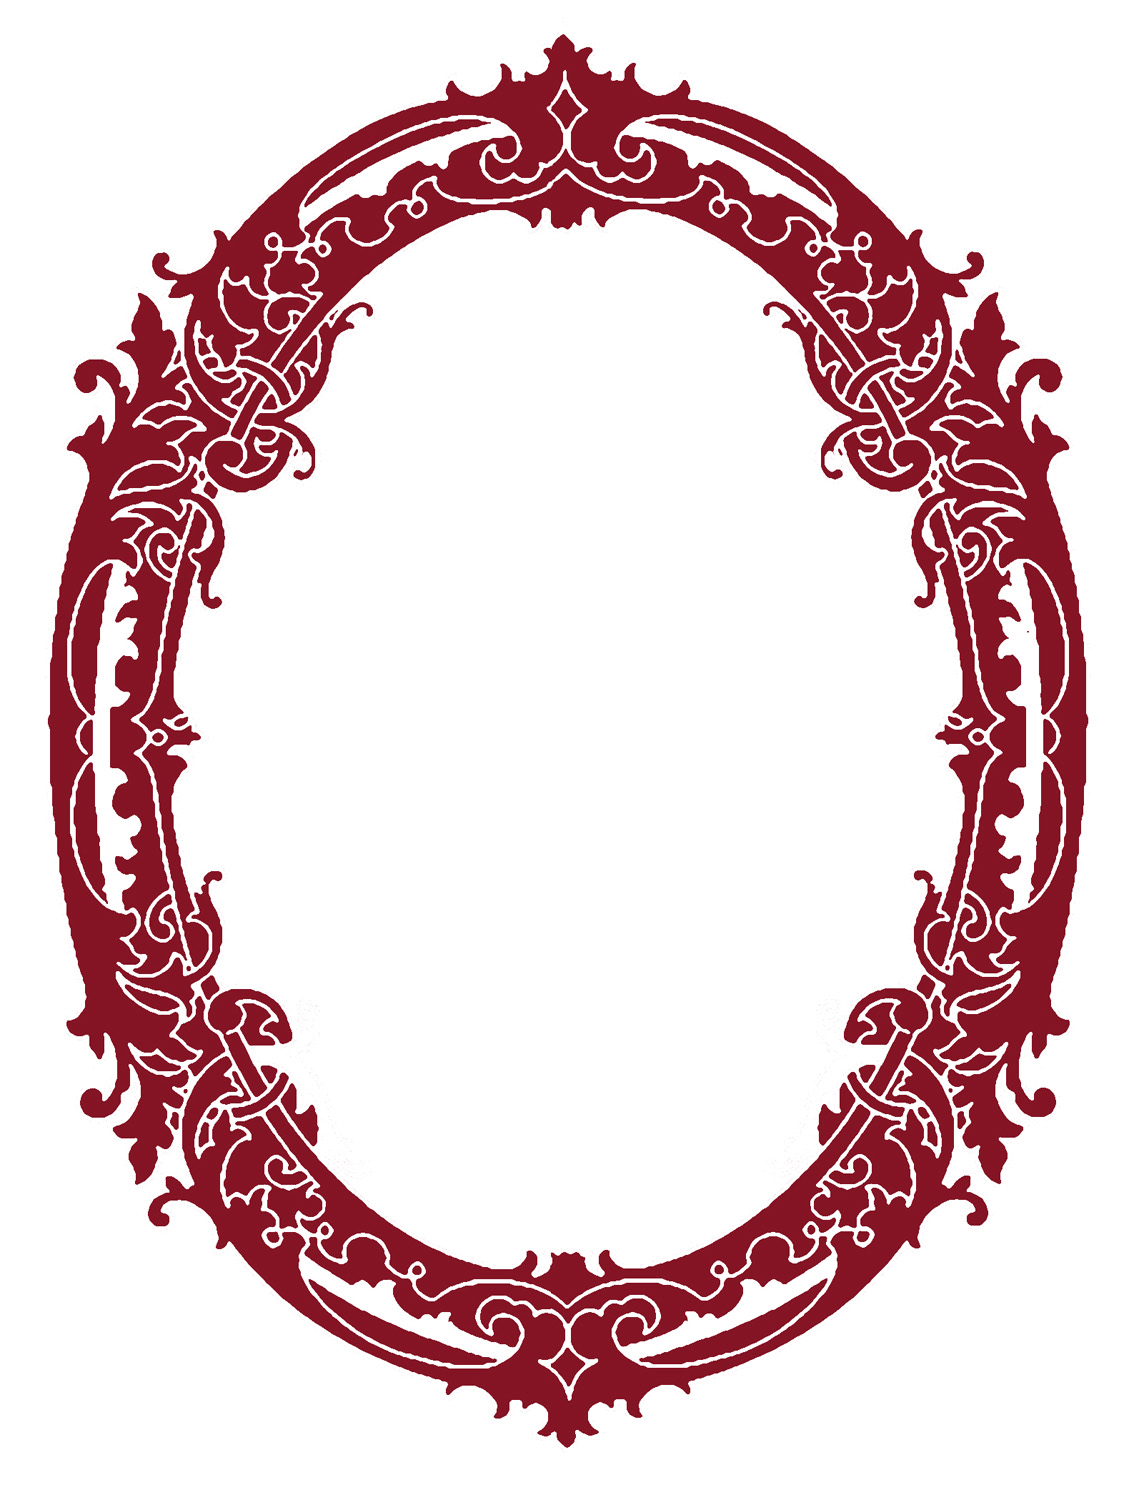 free clipart images frames - photo #39